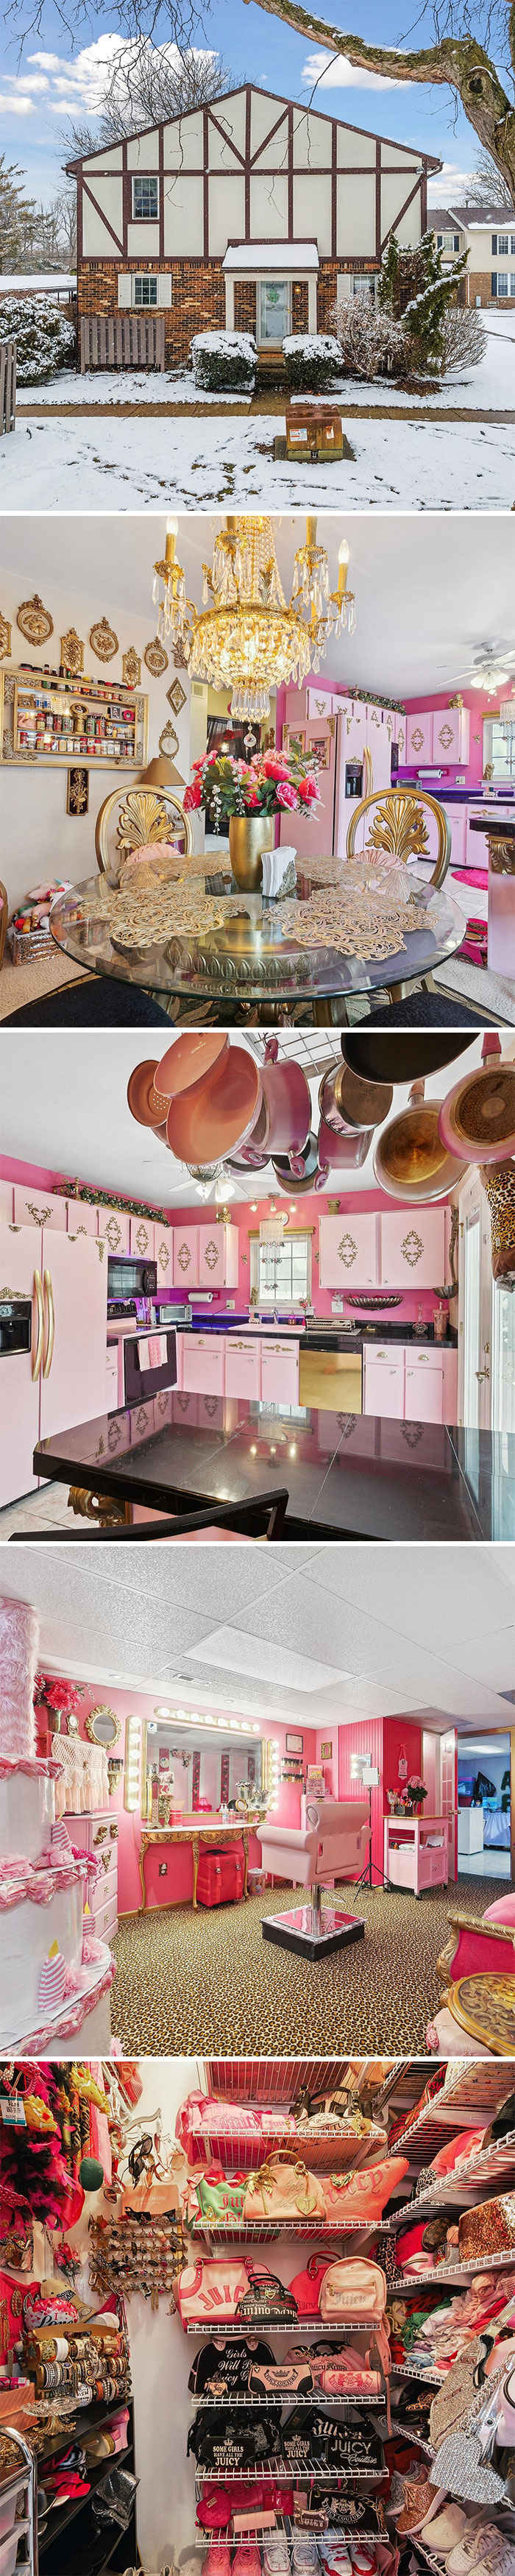 You Never Know What’s Going On Inside A Home: Barbie Dream House Edition. $315,000